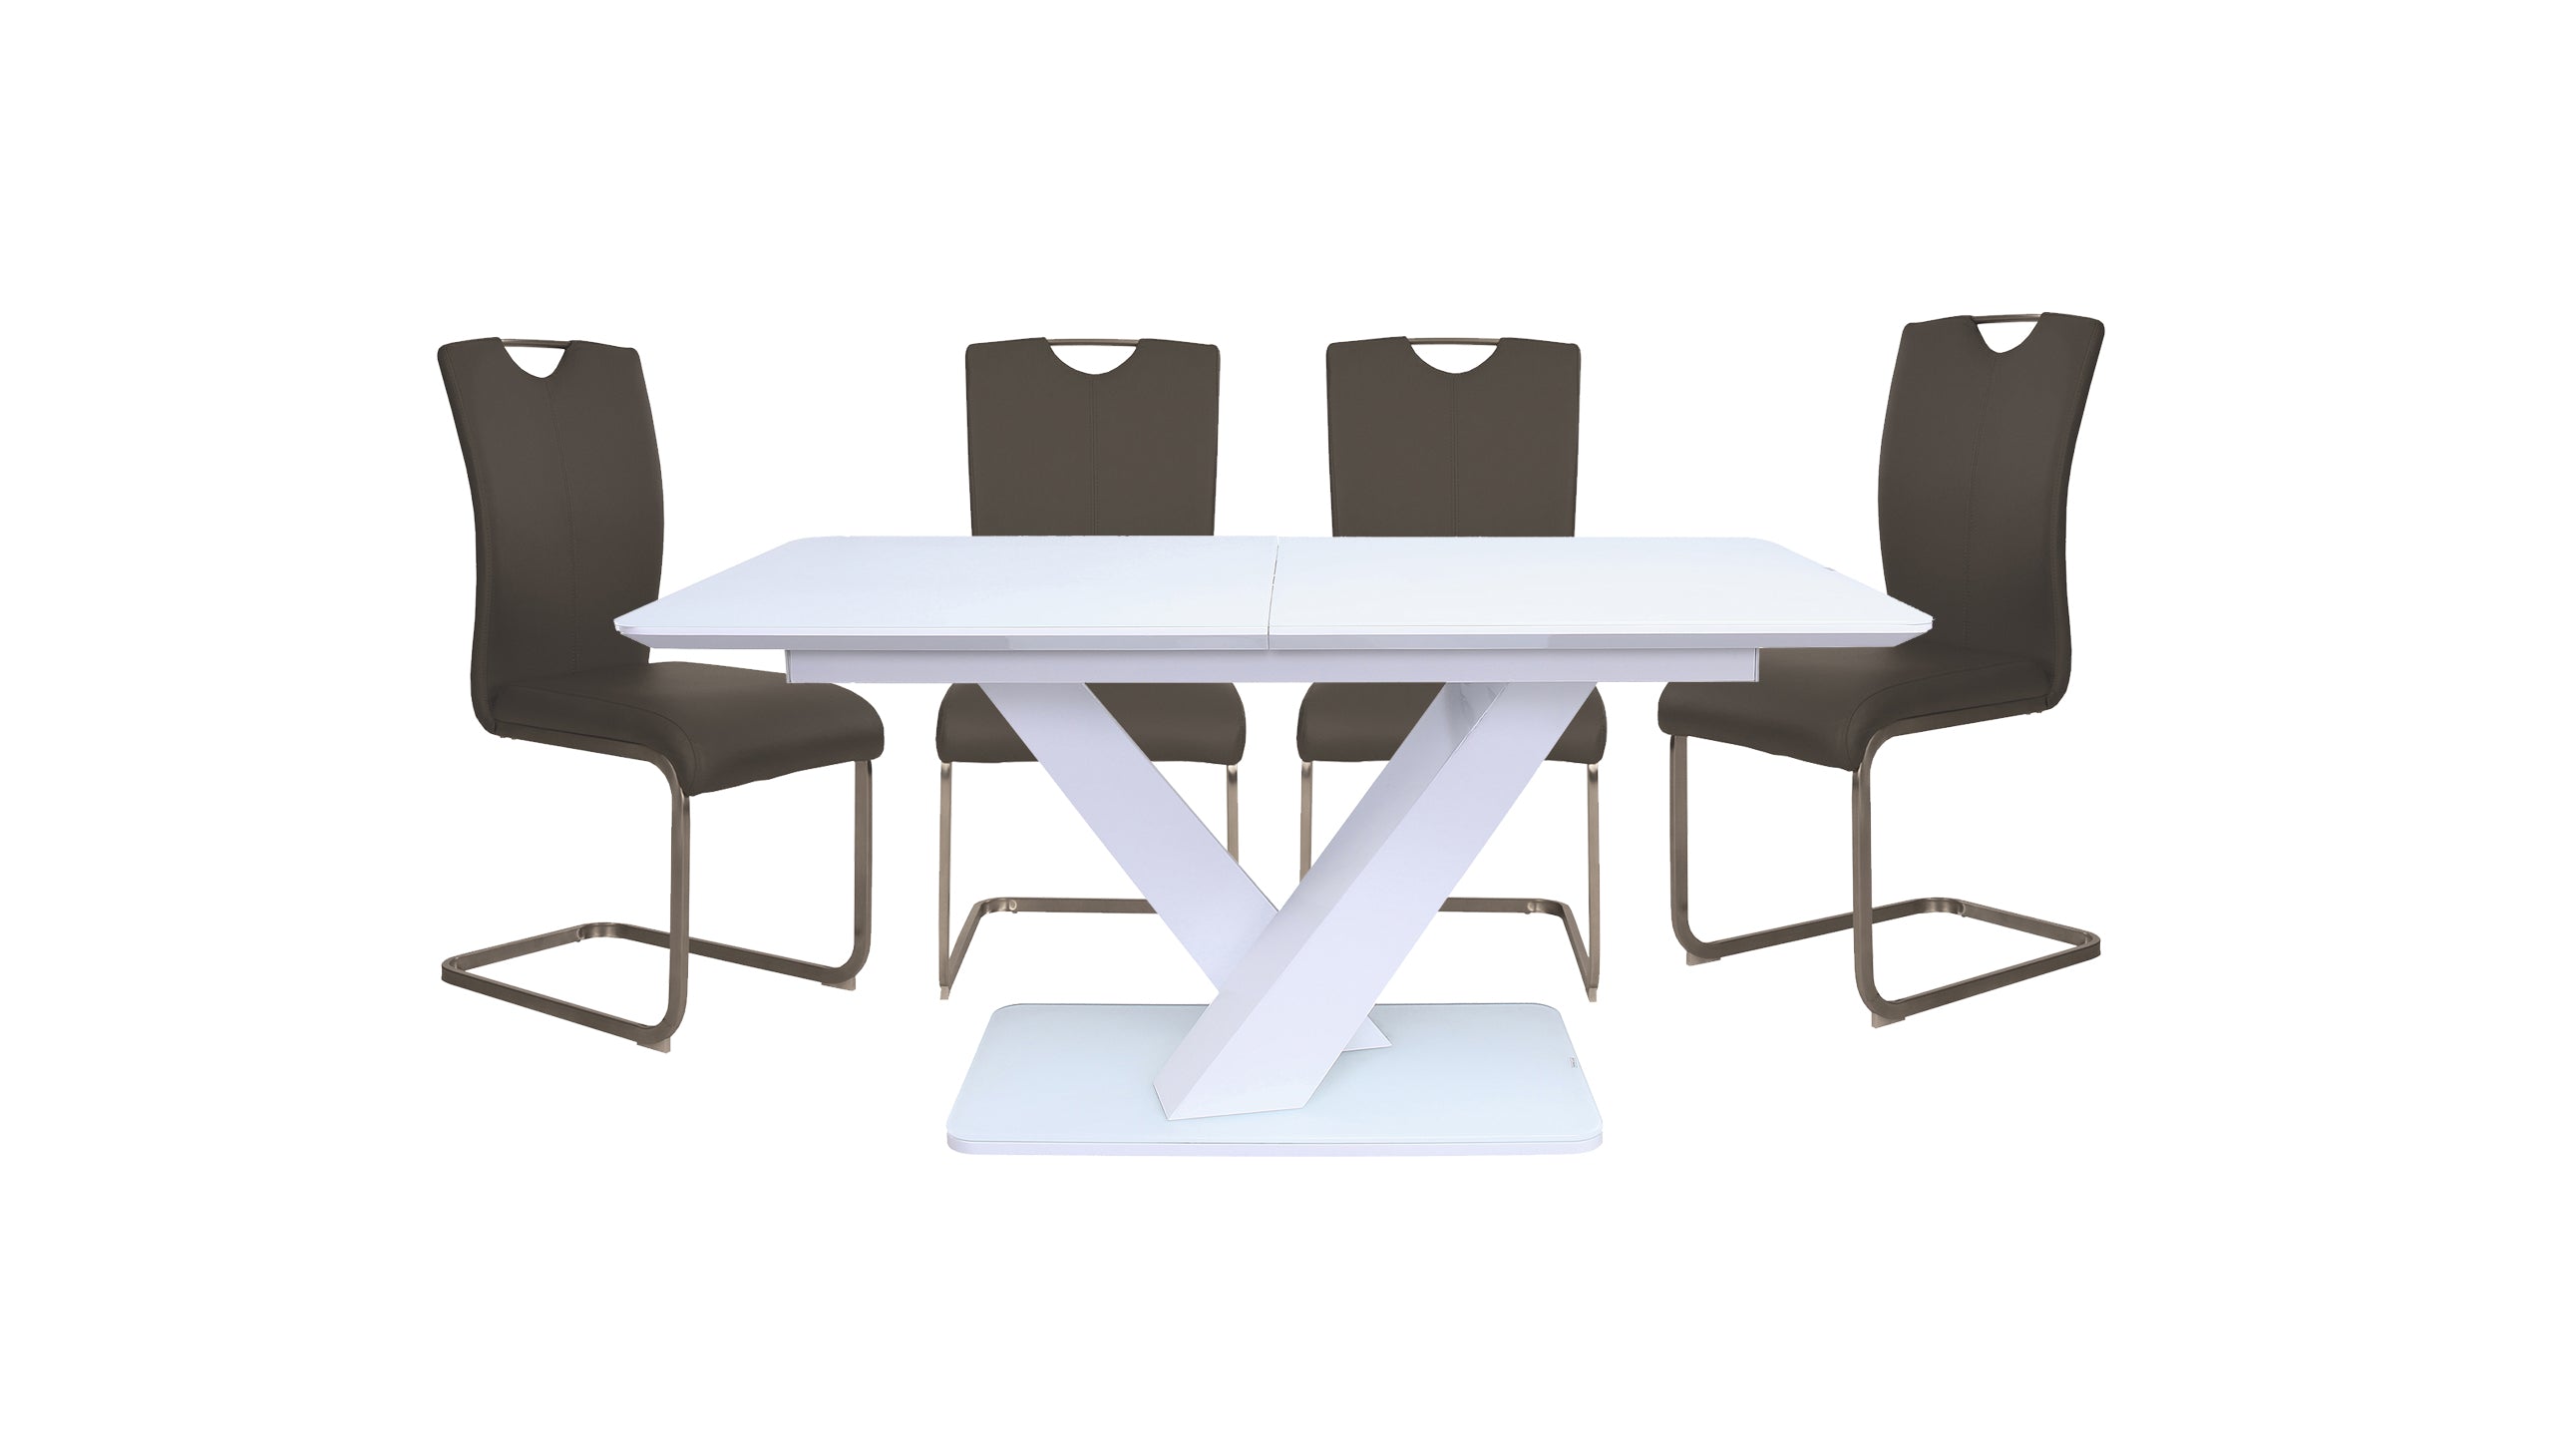 Malmo 1.2m Dining Table in White with 4 Chairs